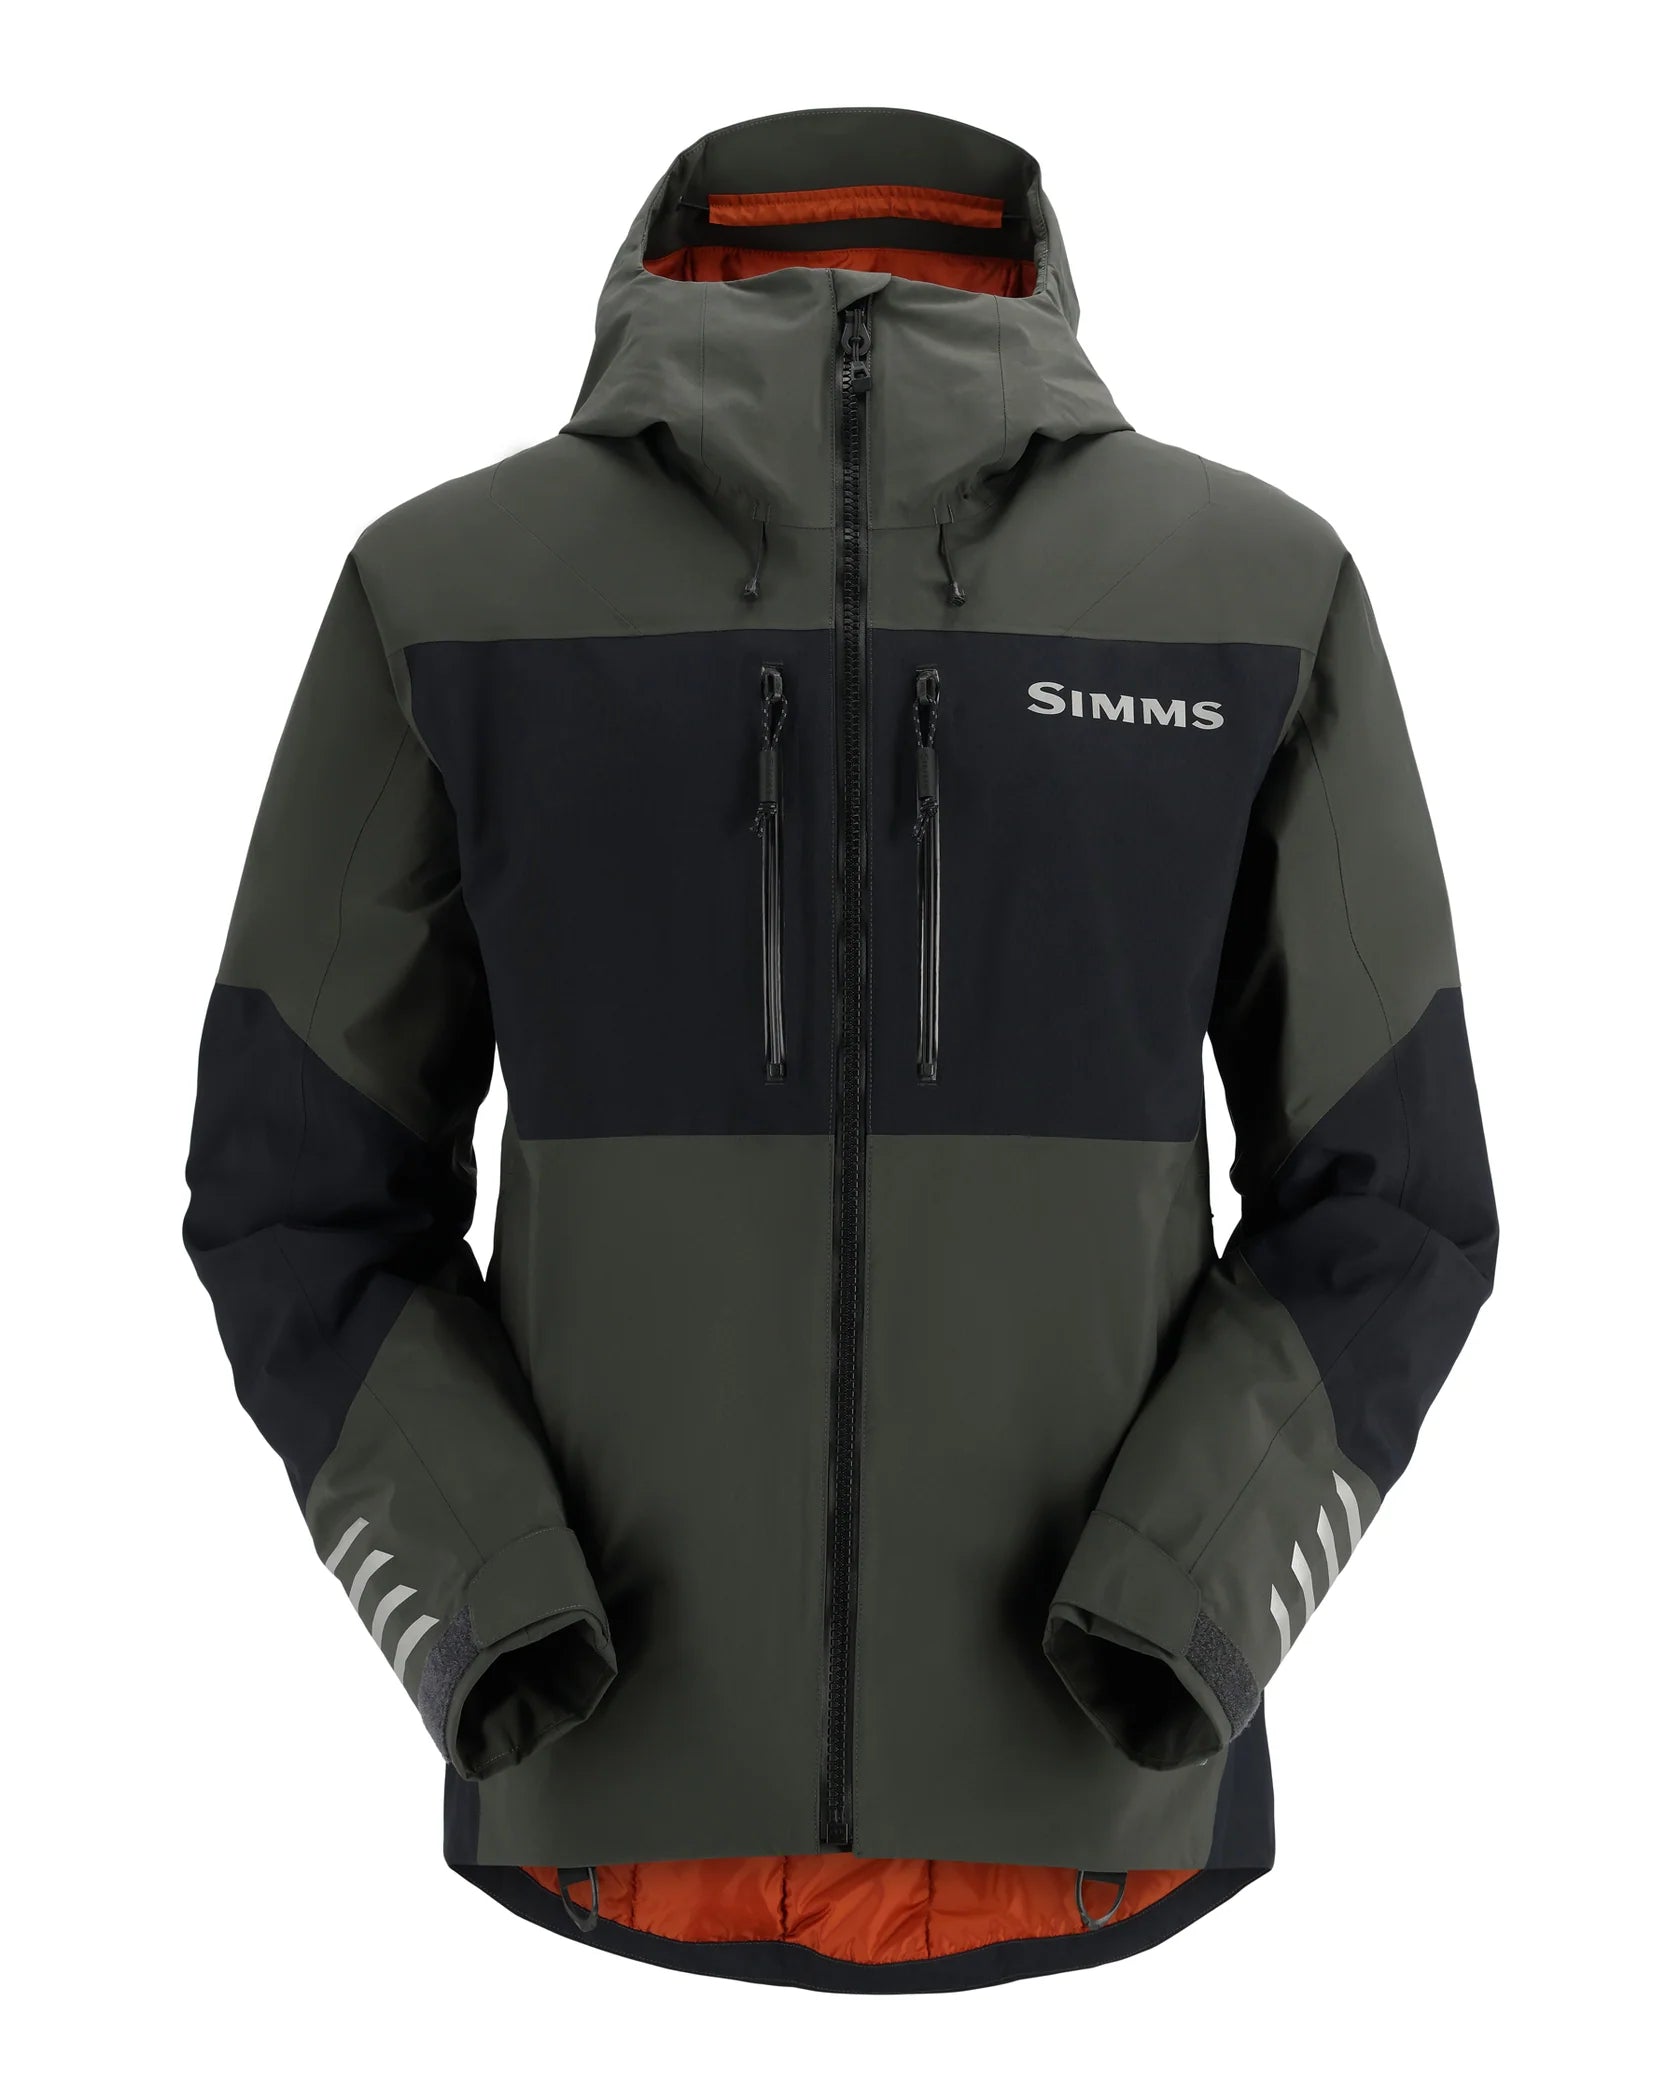 M's Simms Challenger Insulated Jacket, insulated jacket